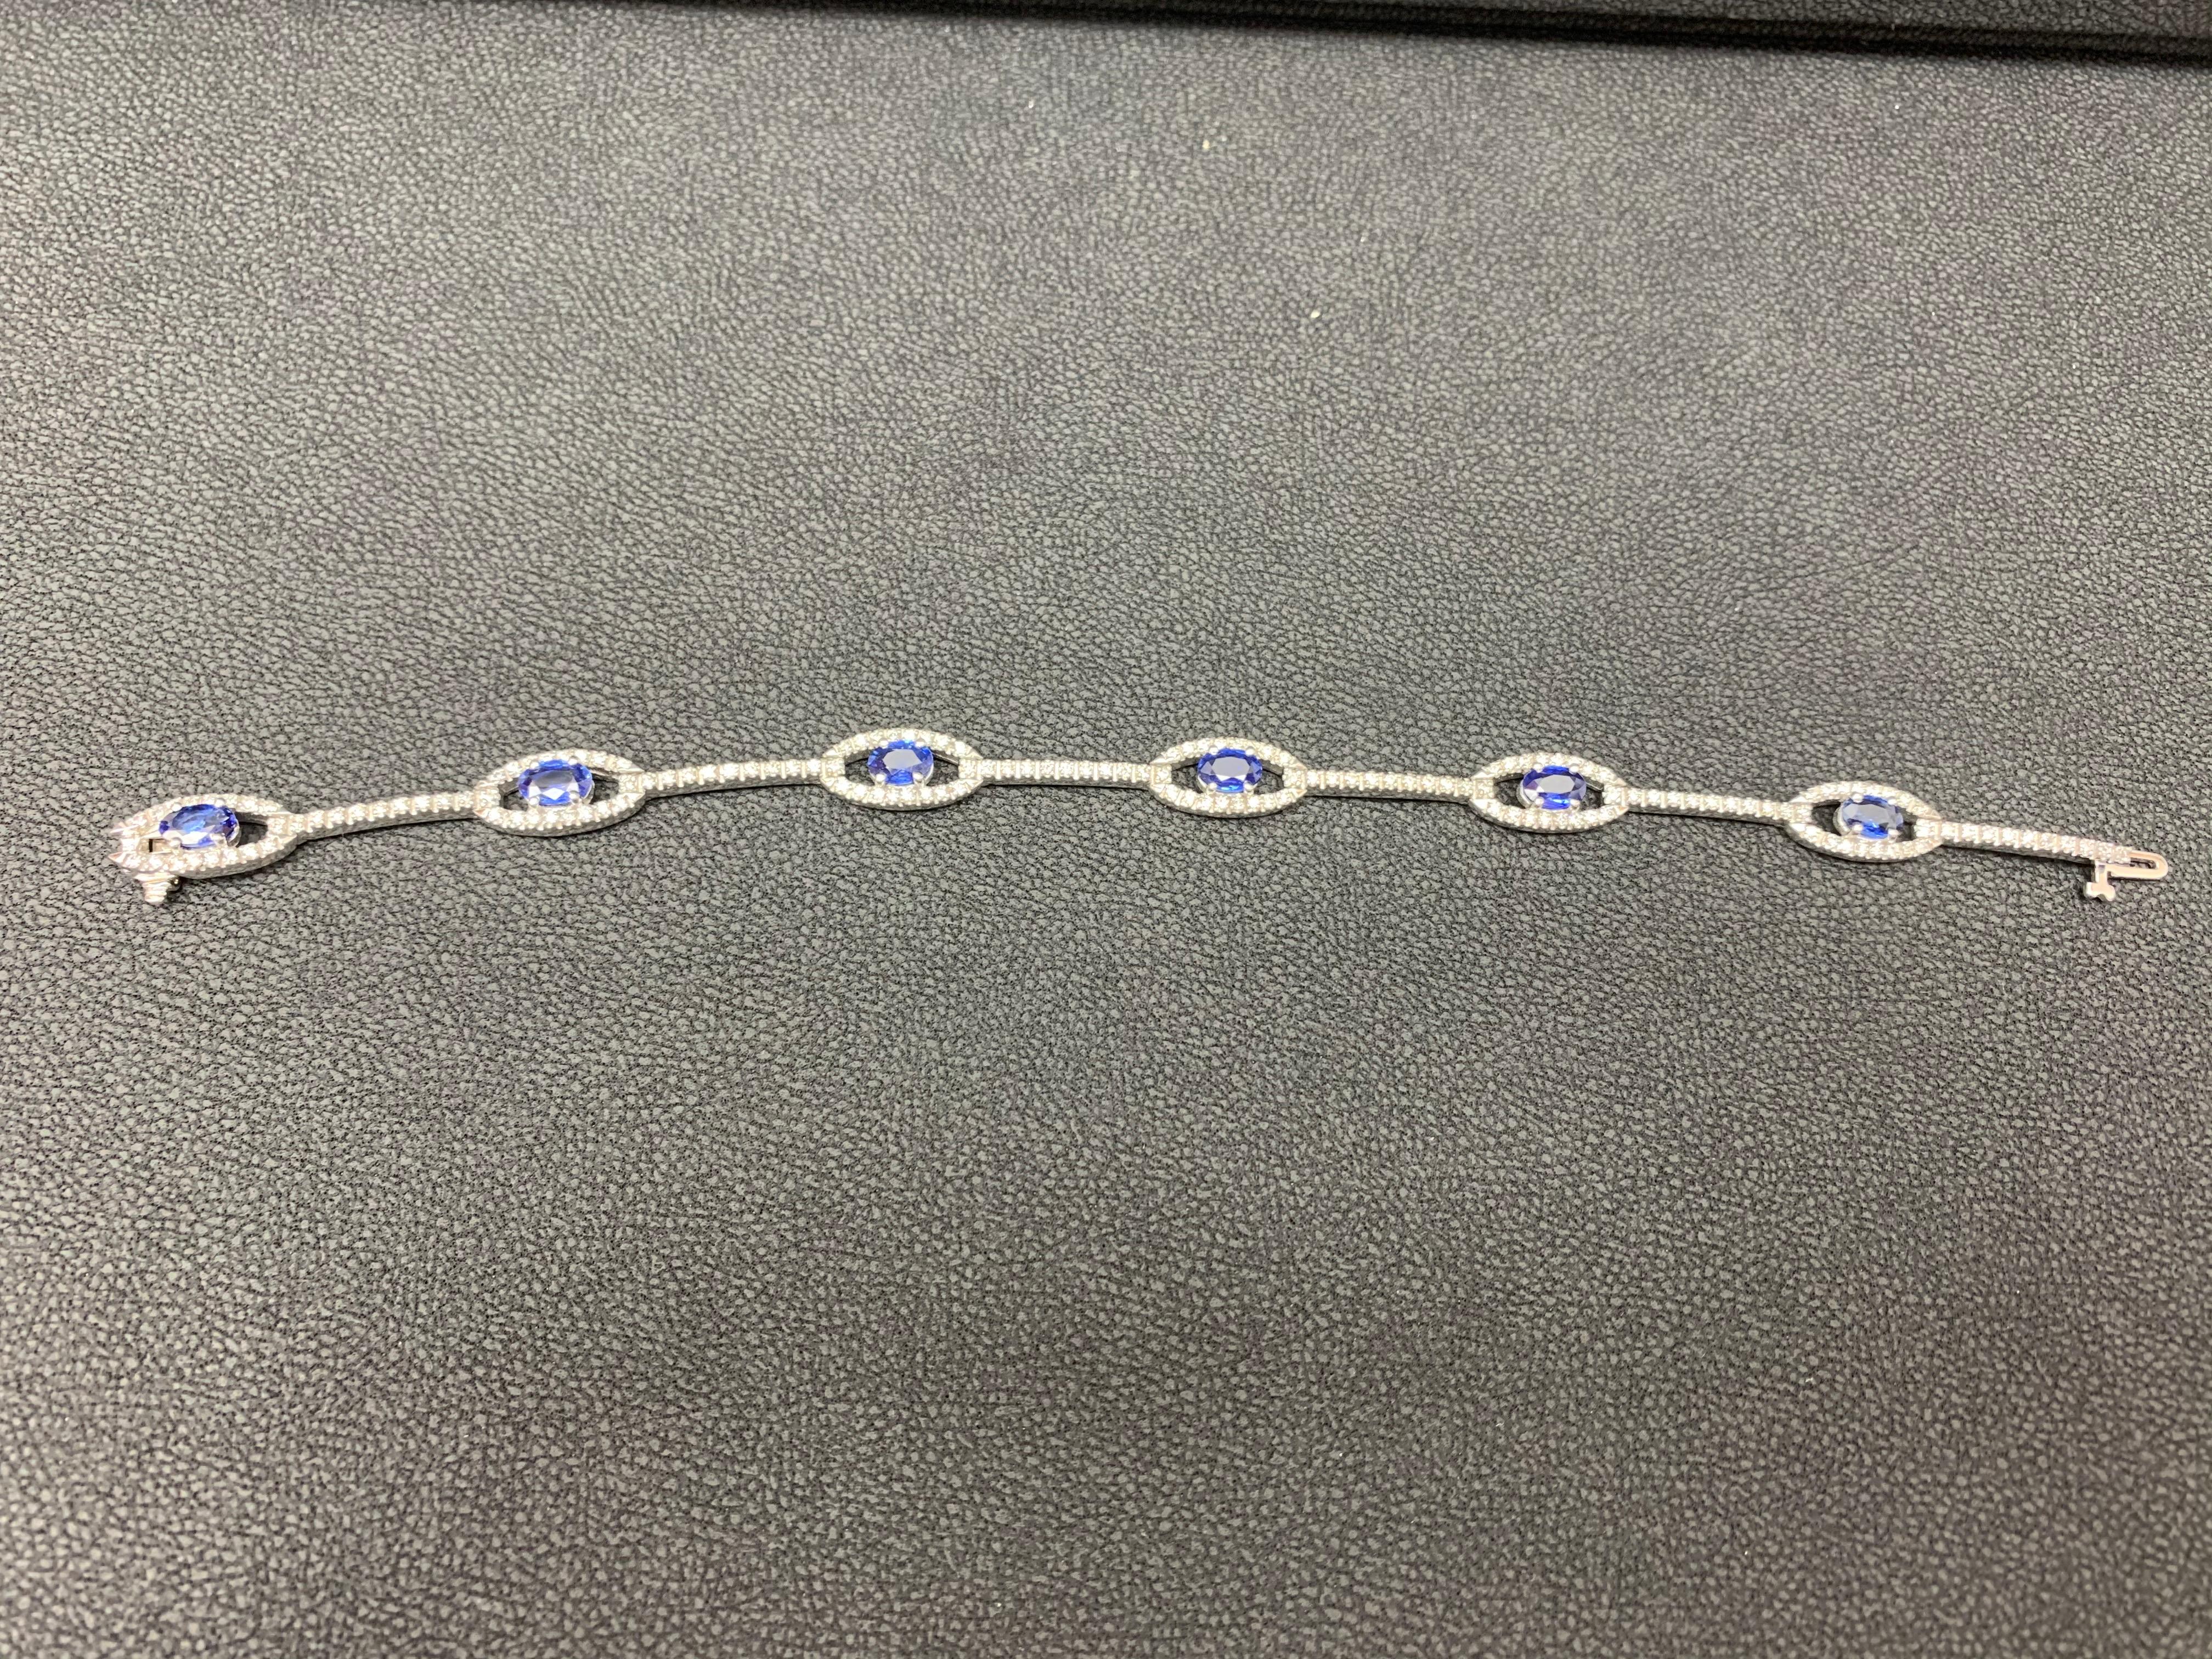 Gorgeous tennis bracelet set with 6 Blue Sapphires weighing 2.46 Carats in total.  Each link is attached to a white gold bar set with round diamonds. Sapphires is accented by a single row of round brilliant diamonds. Toal weight of Diamonds 1.14